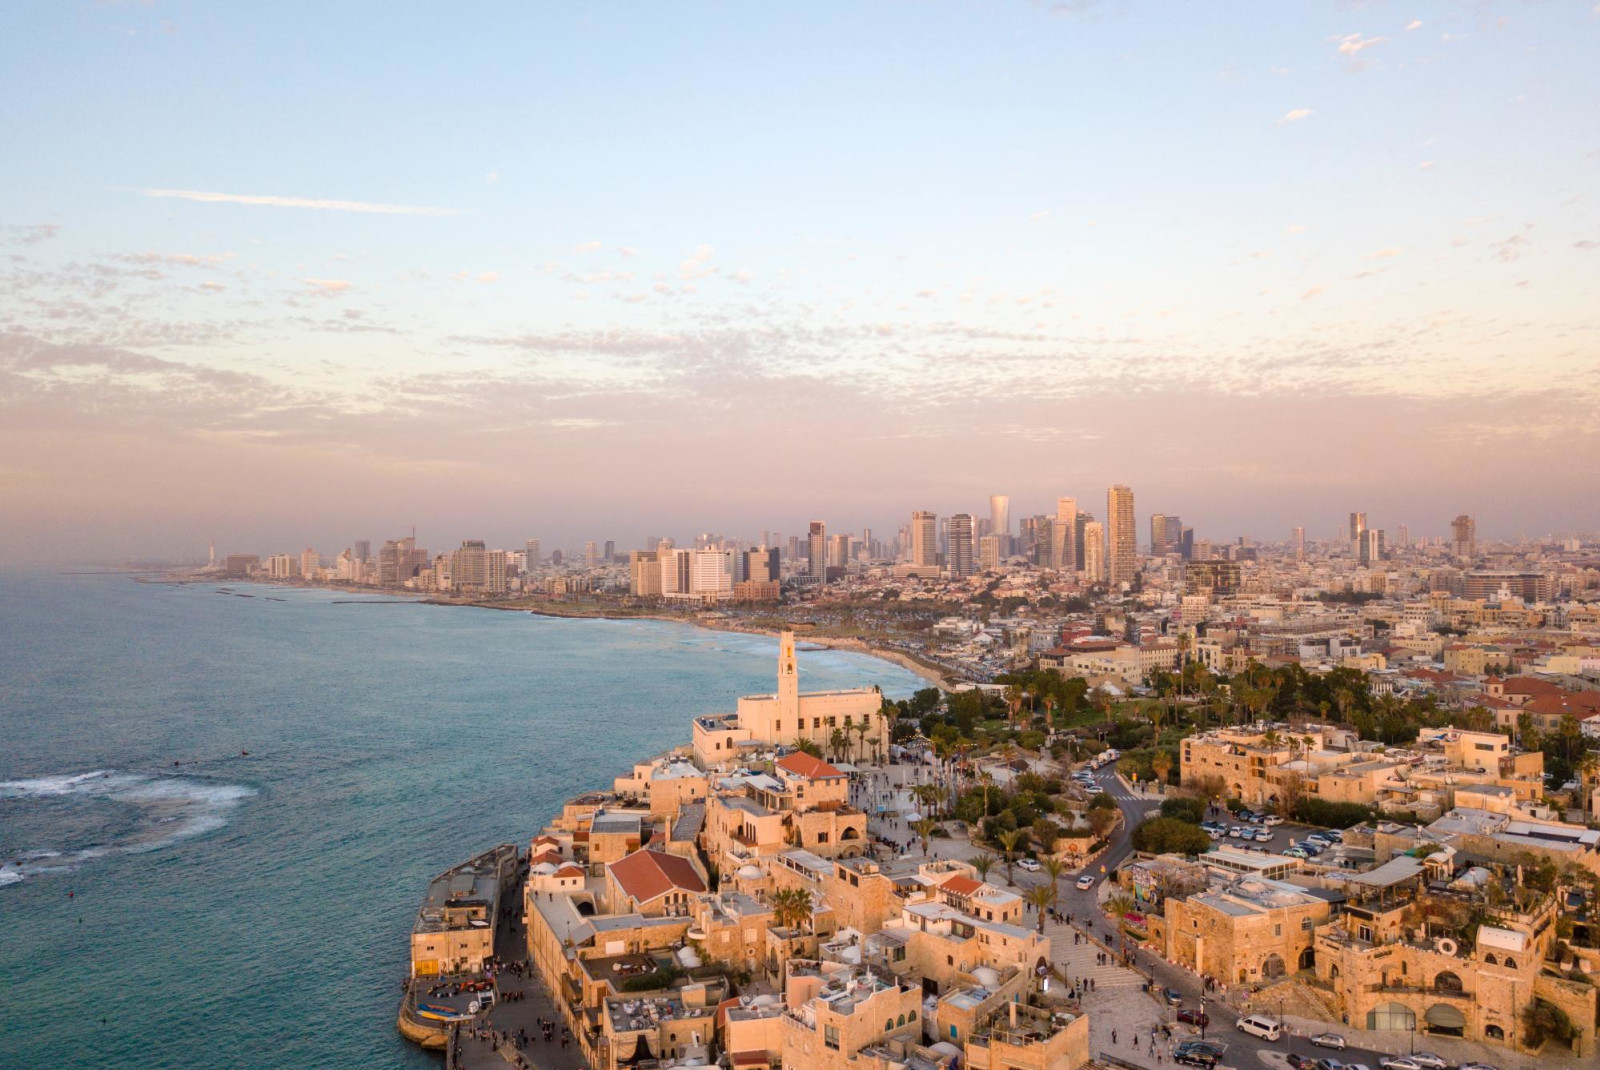 City with modern and historic buildings, Tel Aviv, next to ocean as the sun sets.